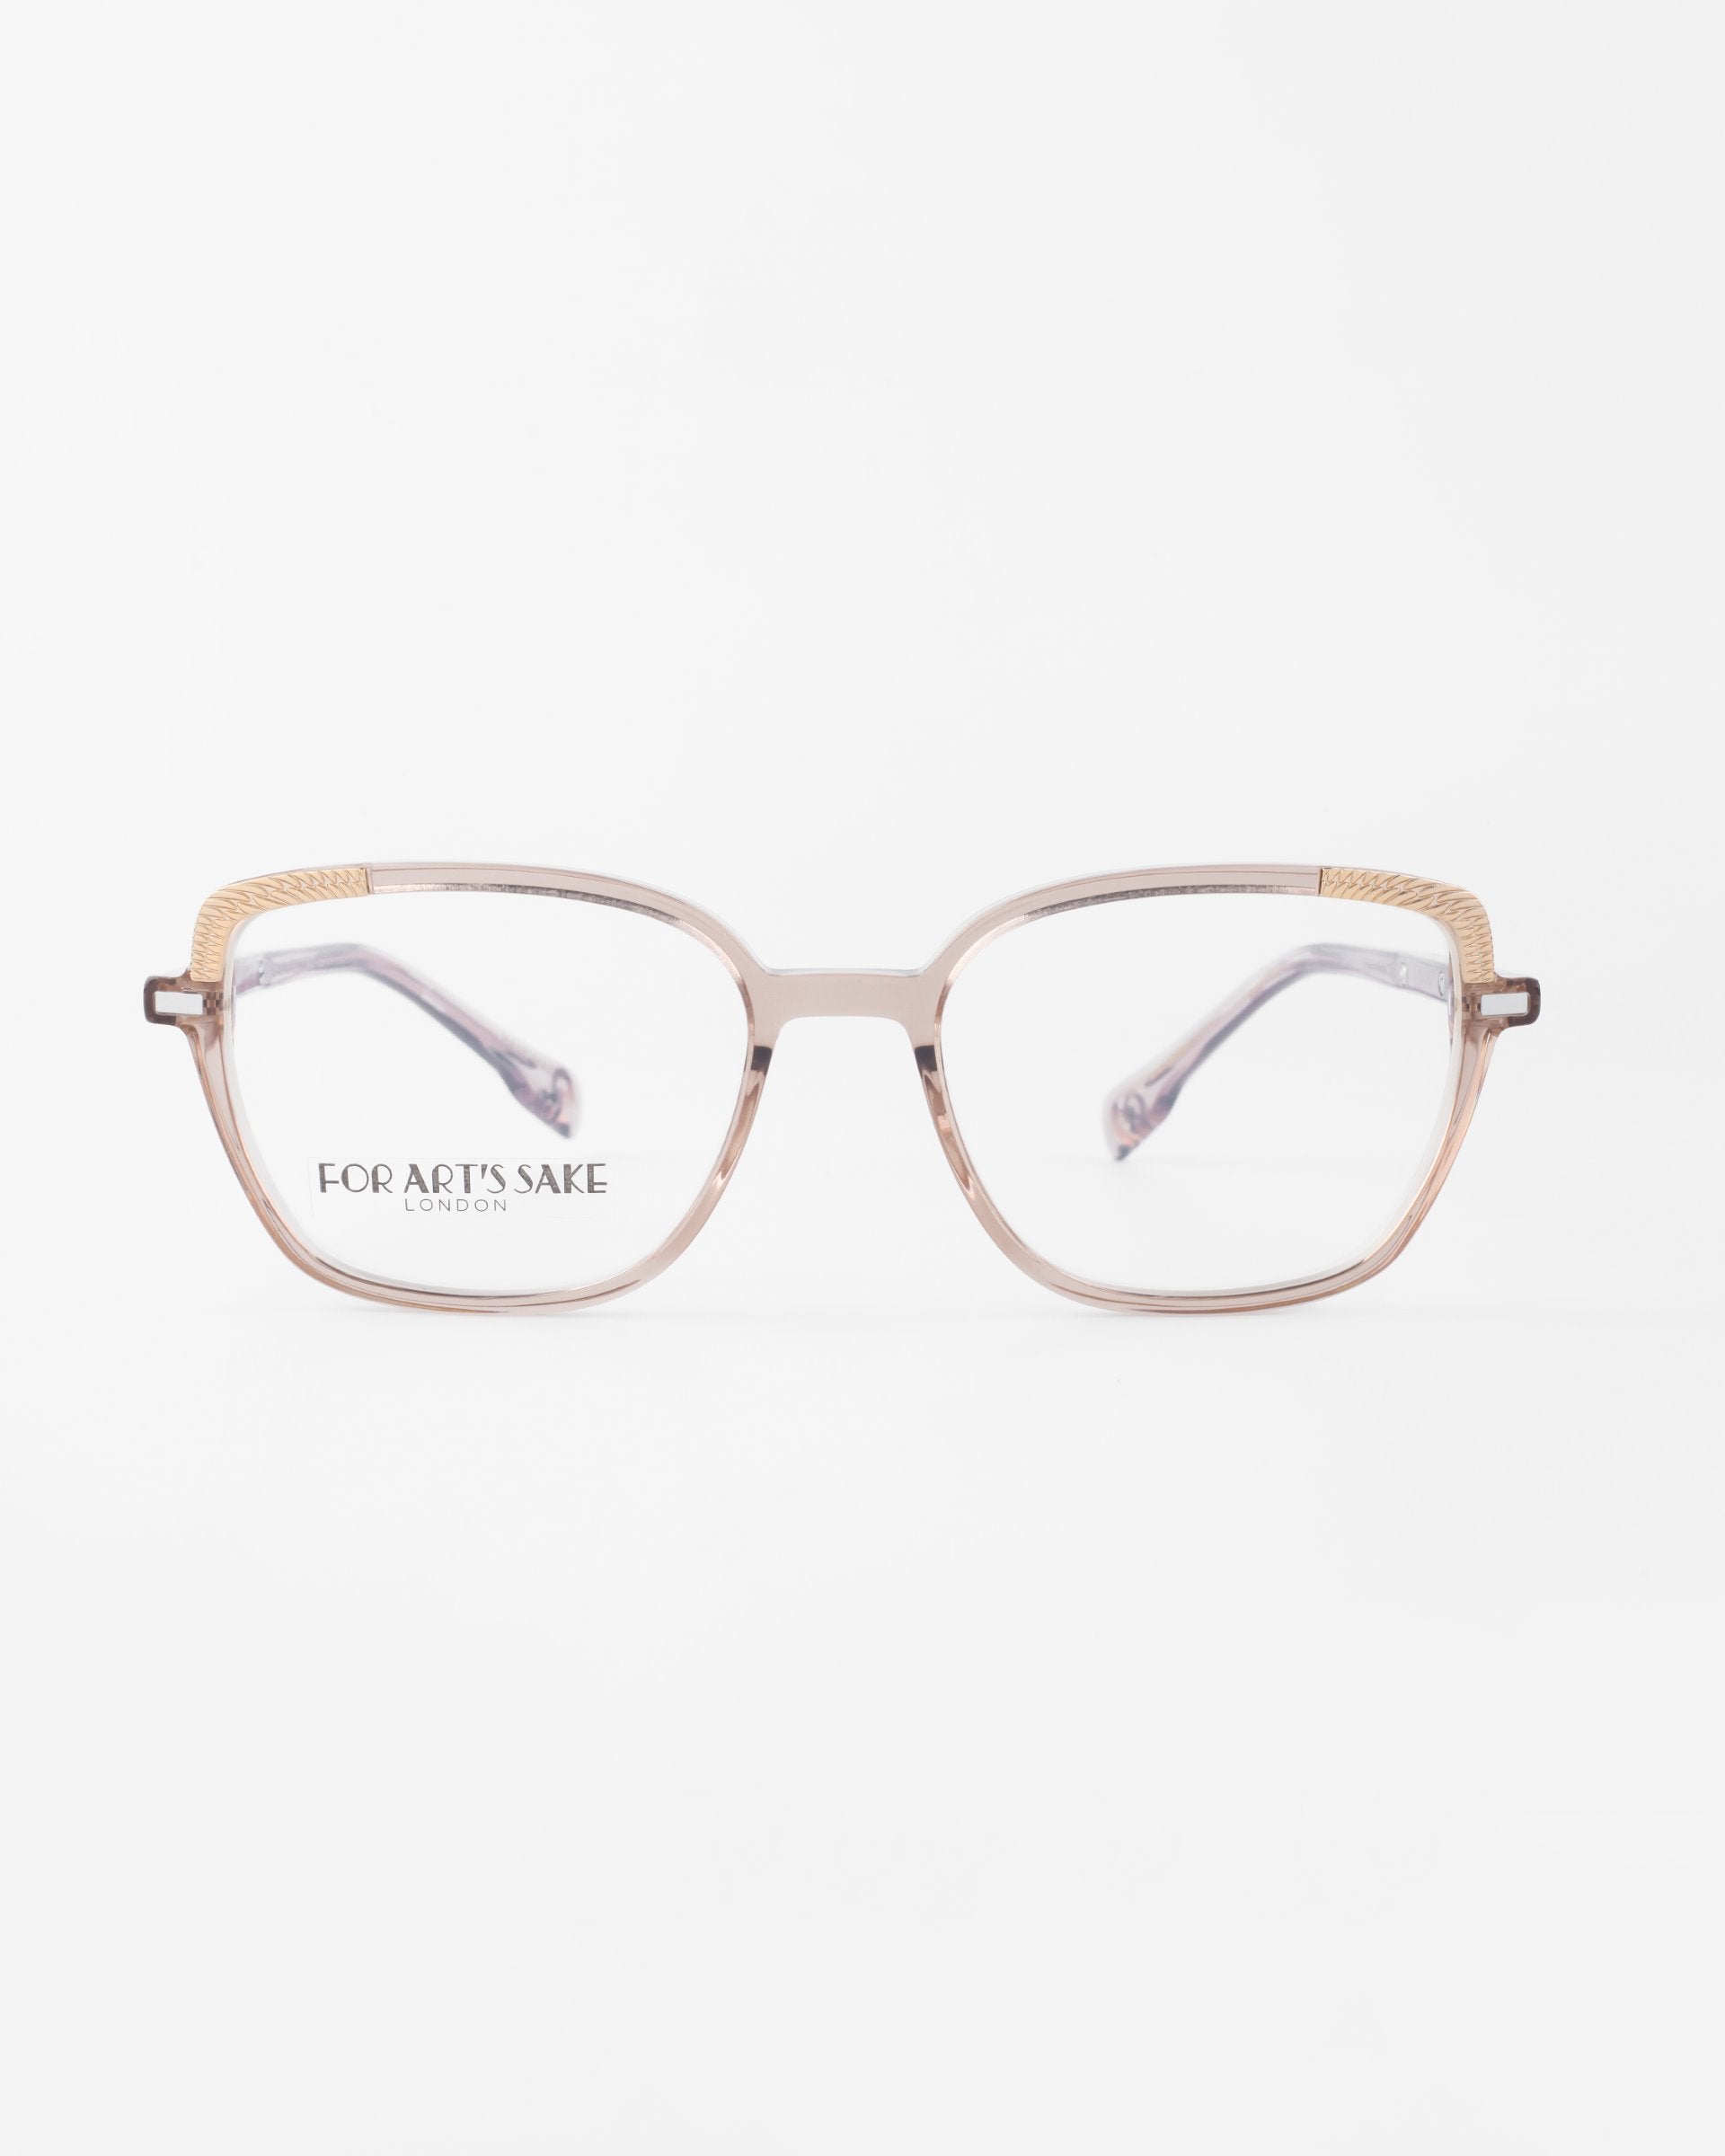 A pair of stylish eyeglasses with prescription lenses and a beige frame. The temples feature an elegant 18-karat gold-plated accent near the front. The brand name &quot;For Art&#39;s Sake®&quot; is visible on the left lens. The background is plain white.

Product Name: Mimosa